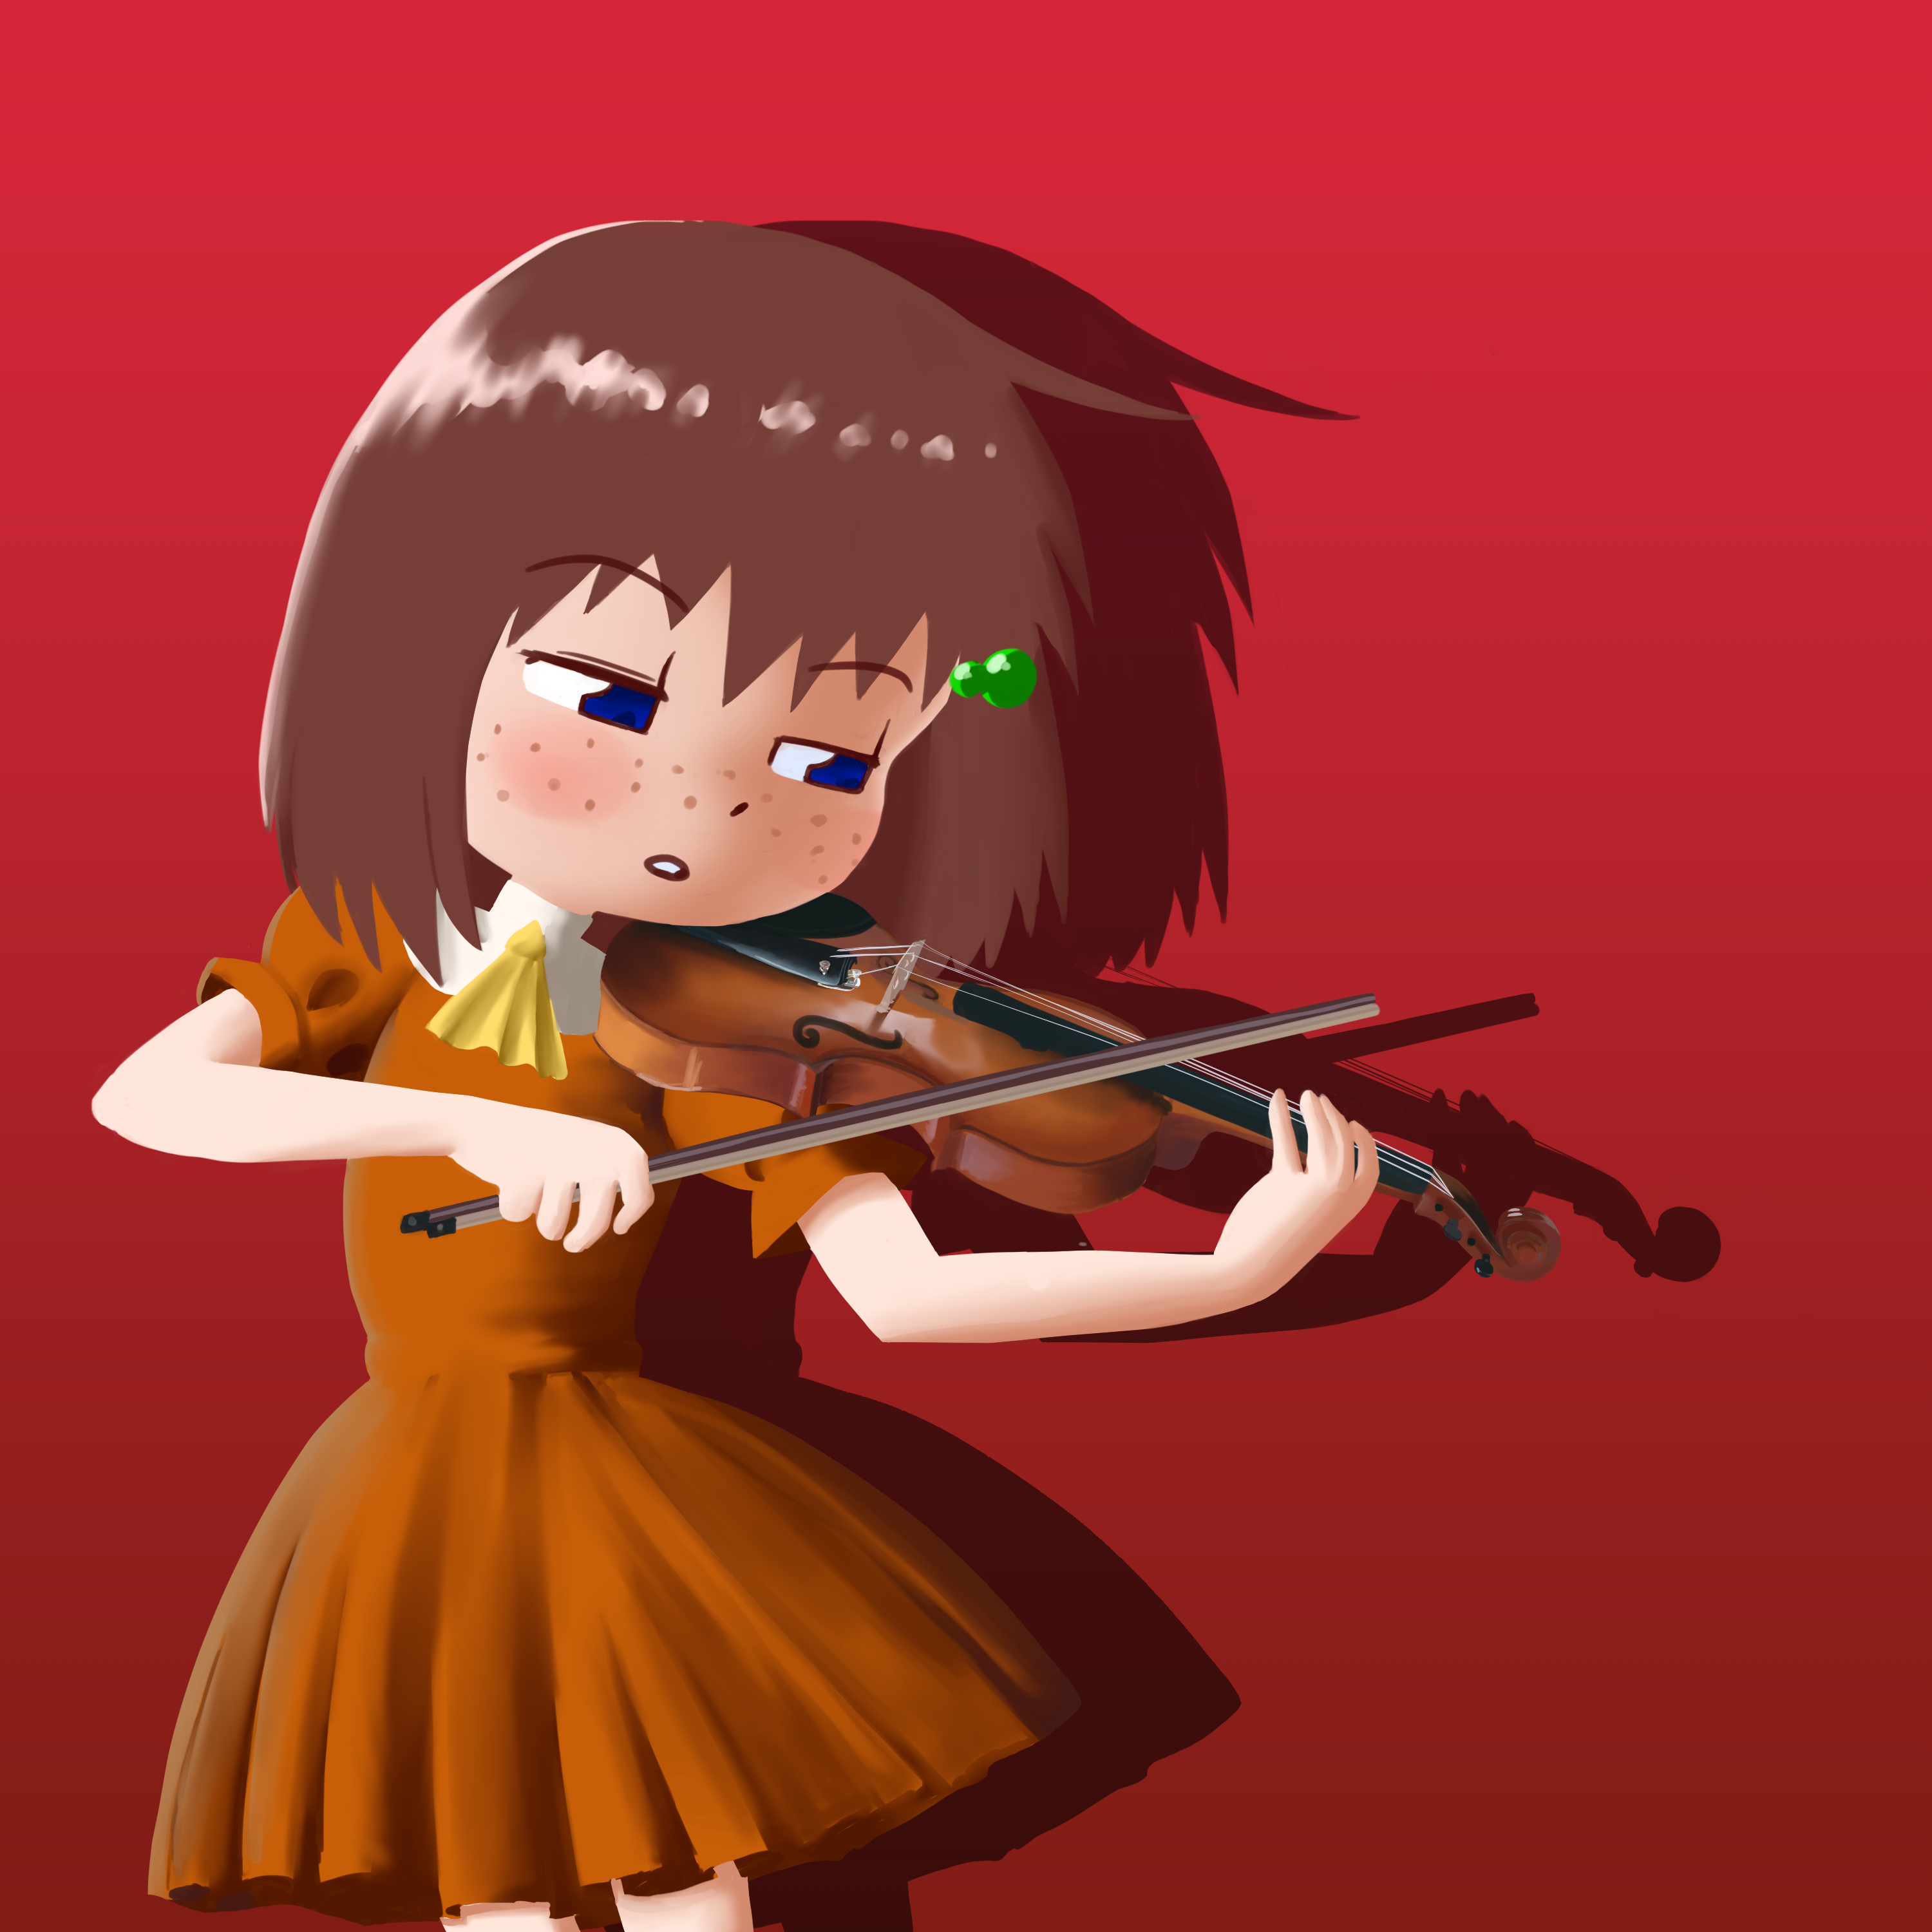 Lily playing her violin